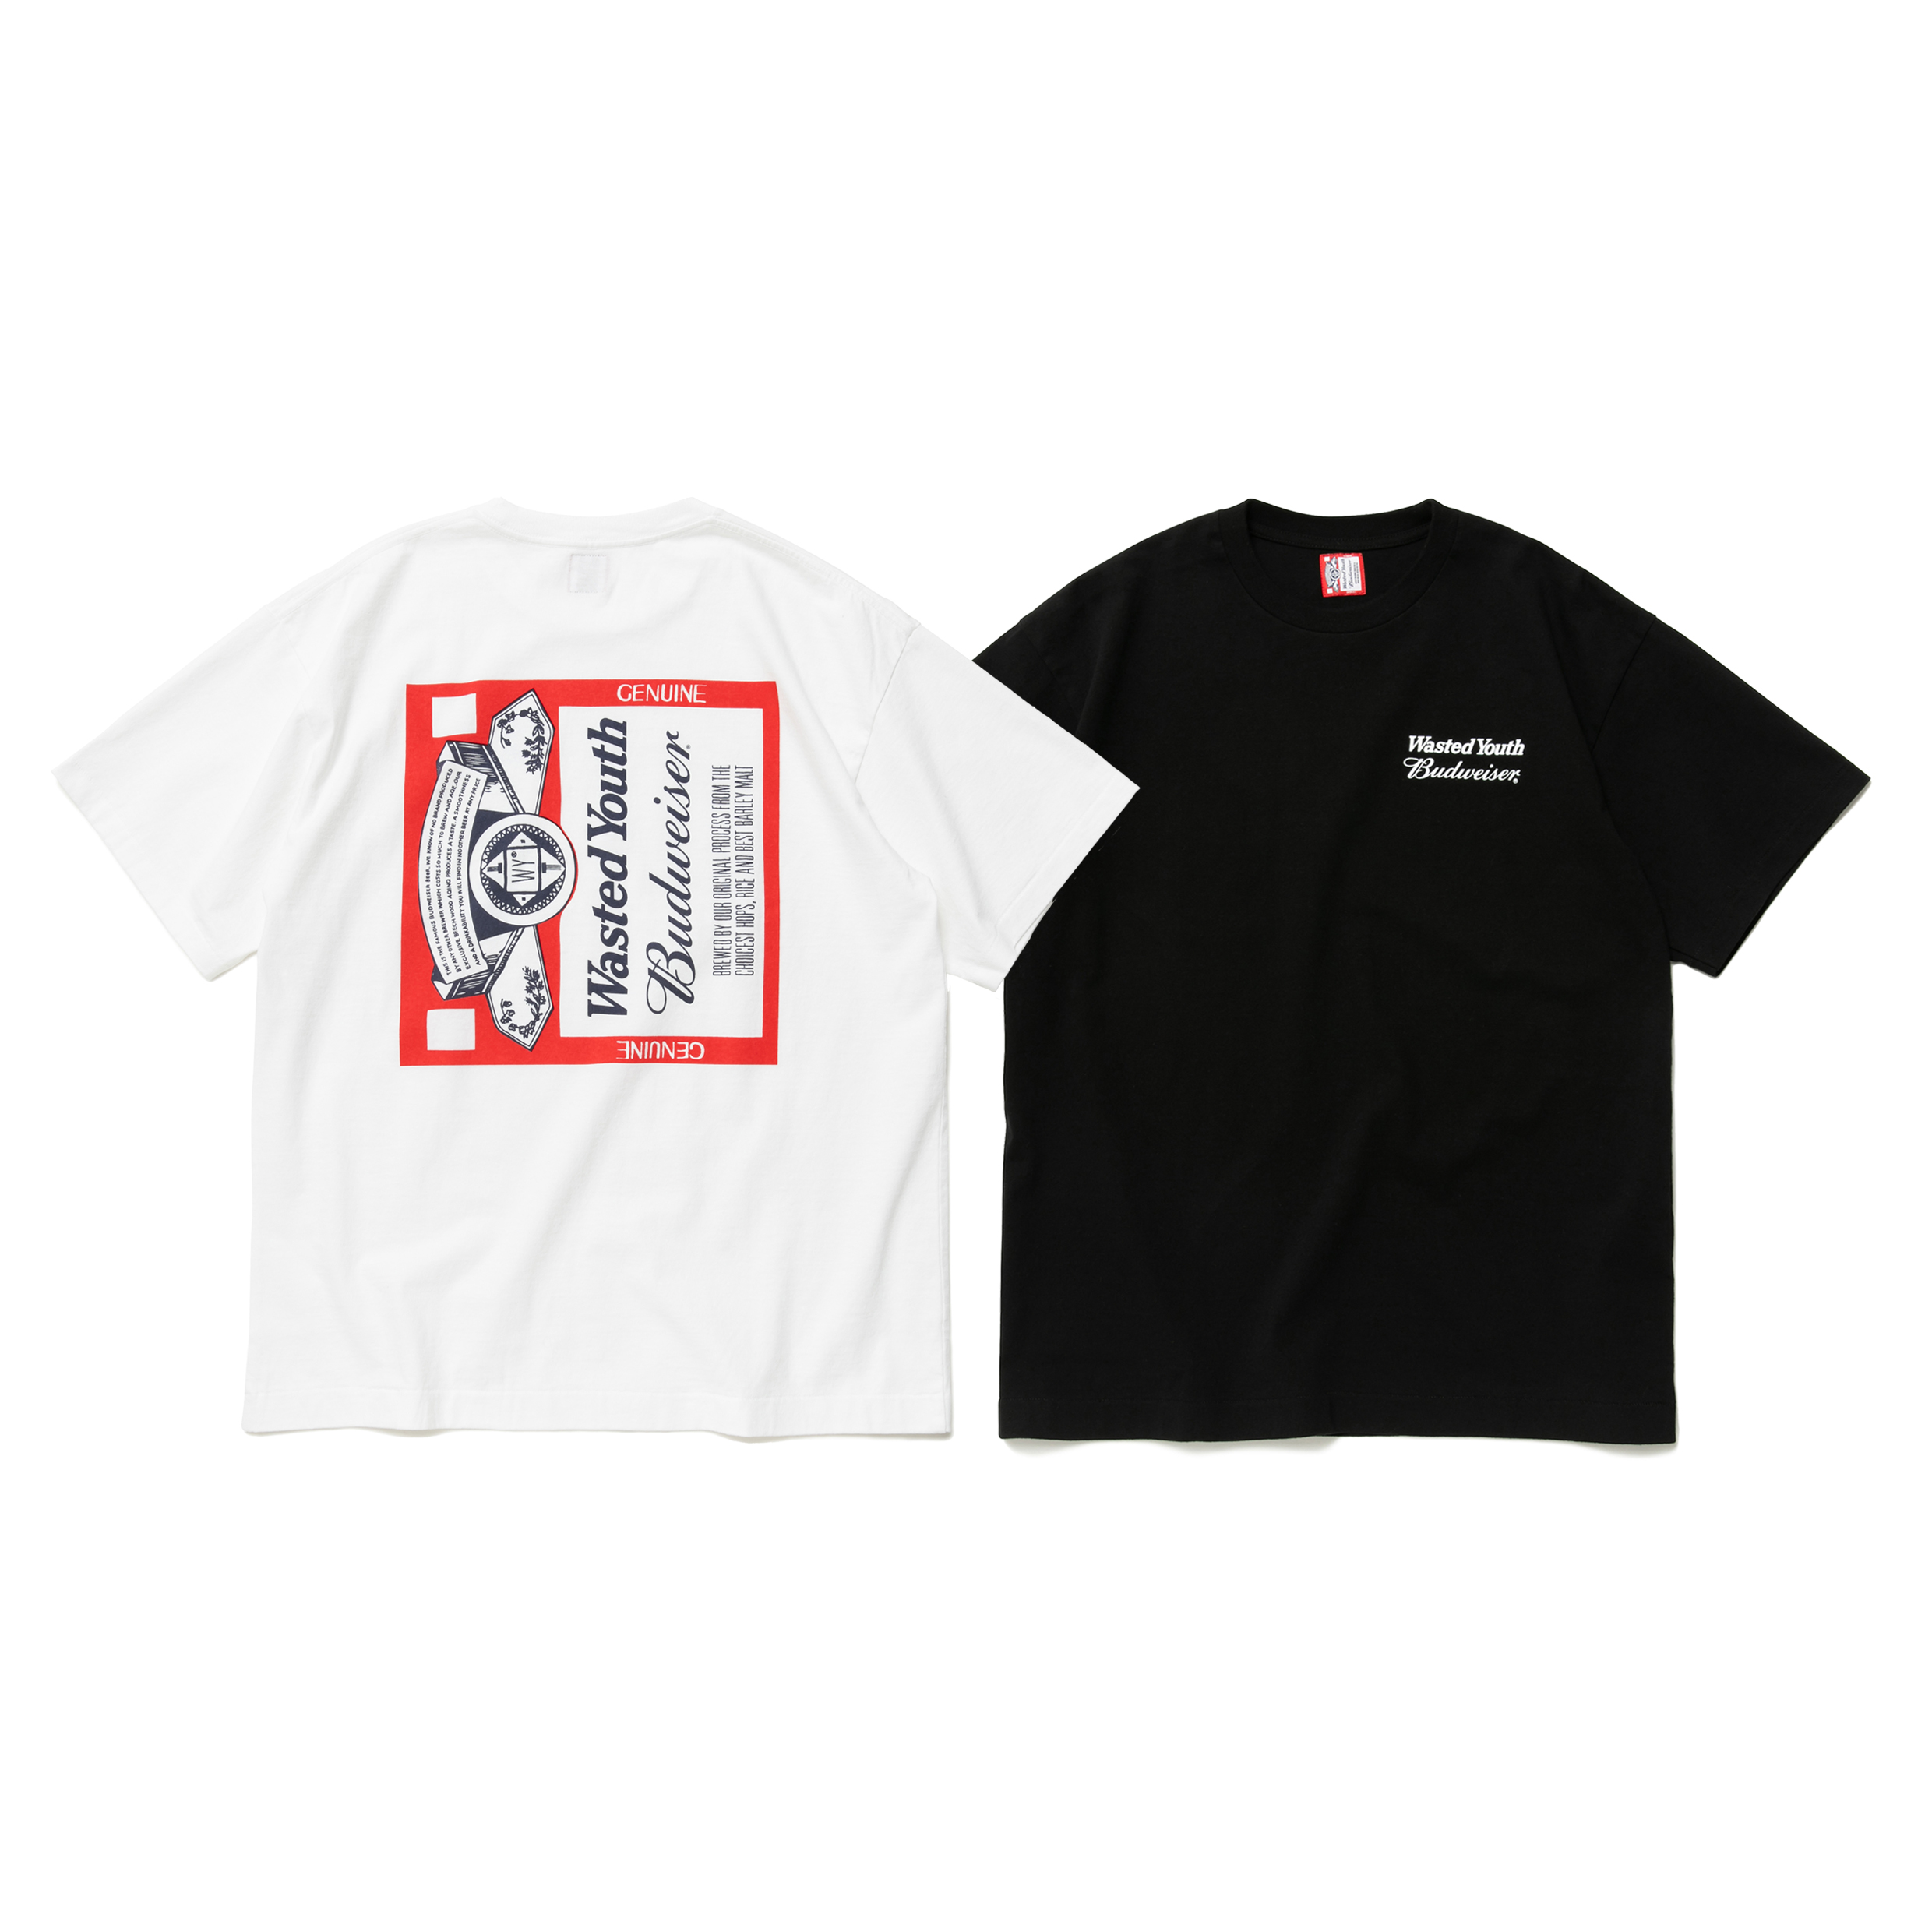 Wasted Youth x Budweiser Collaboration Collection | NEWS | OTSUMO 